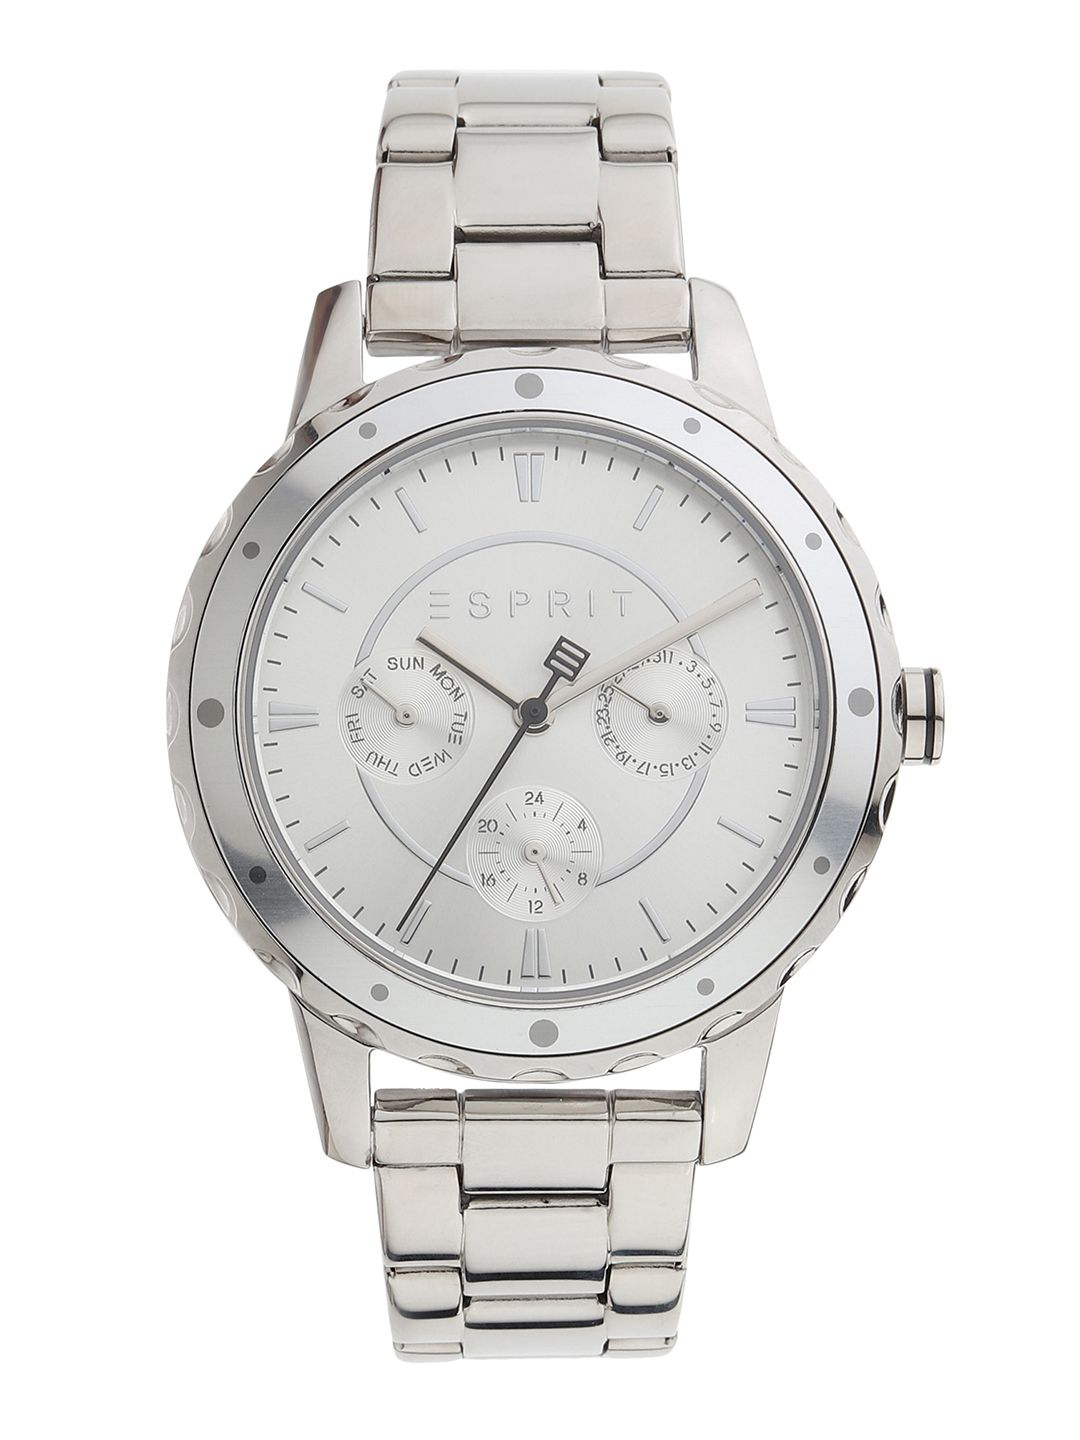 ESPRIT Women Silver-Toned Analogue Watch ES1L140M0075 Price in India